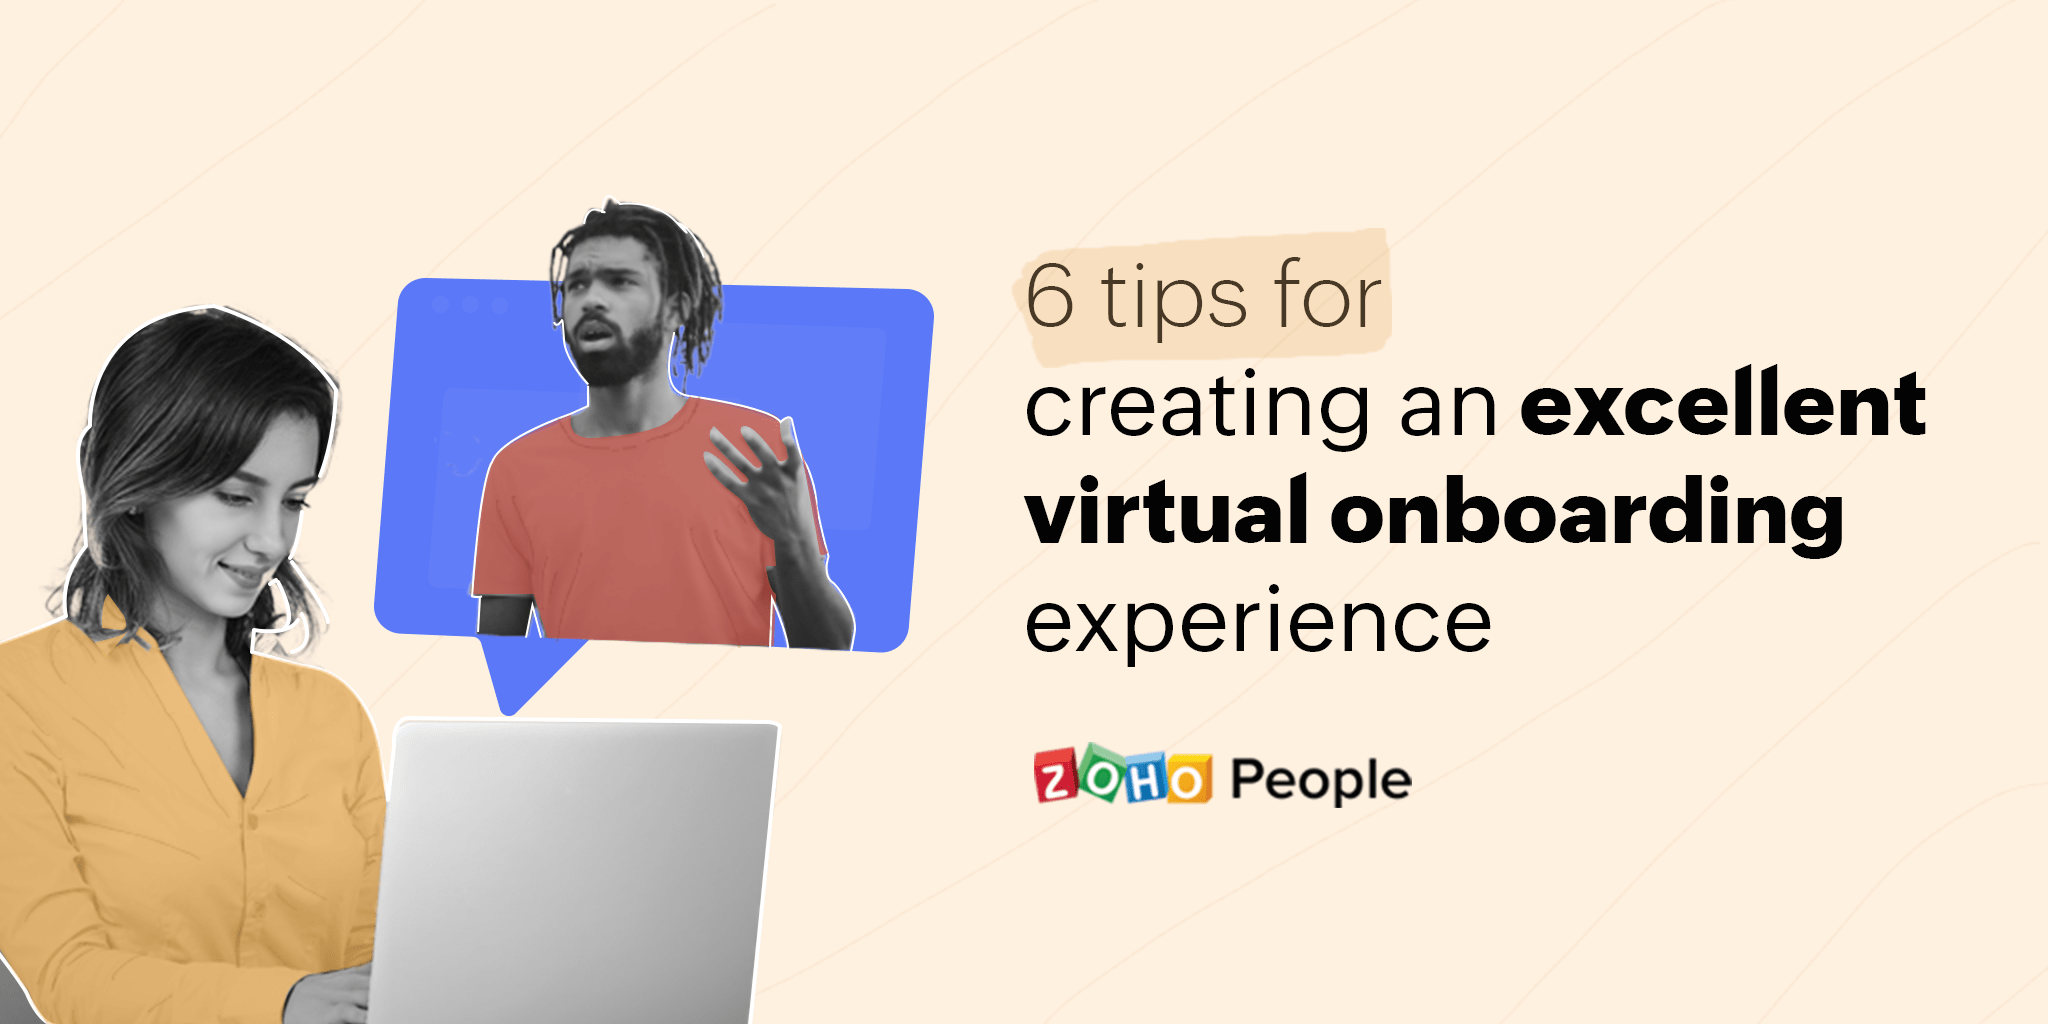 6 tips to create an excellent virtual onboarding